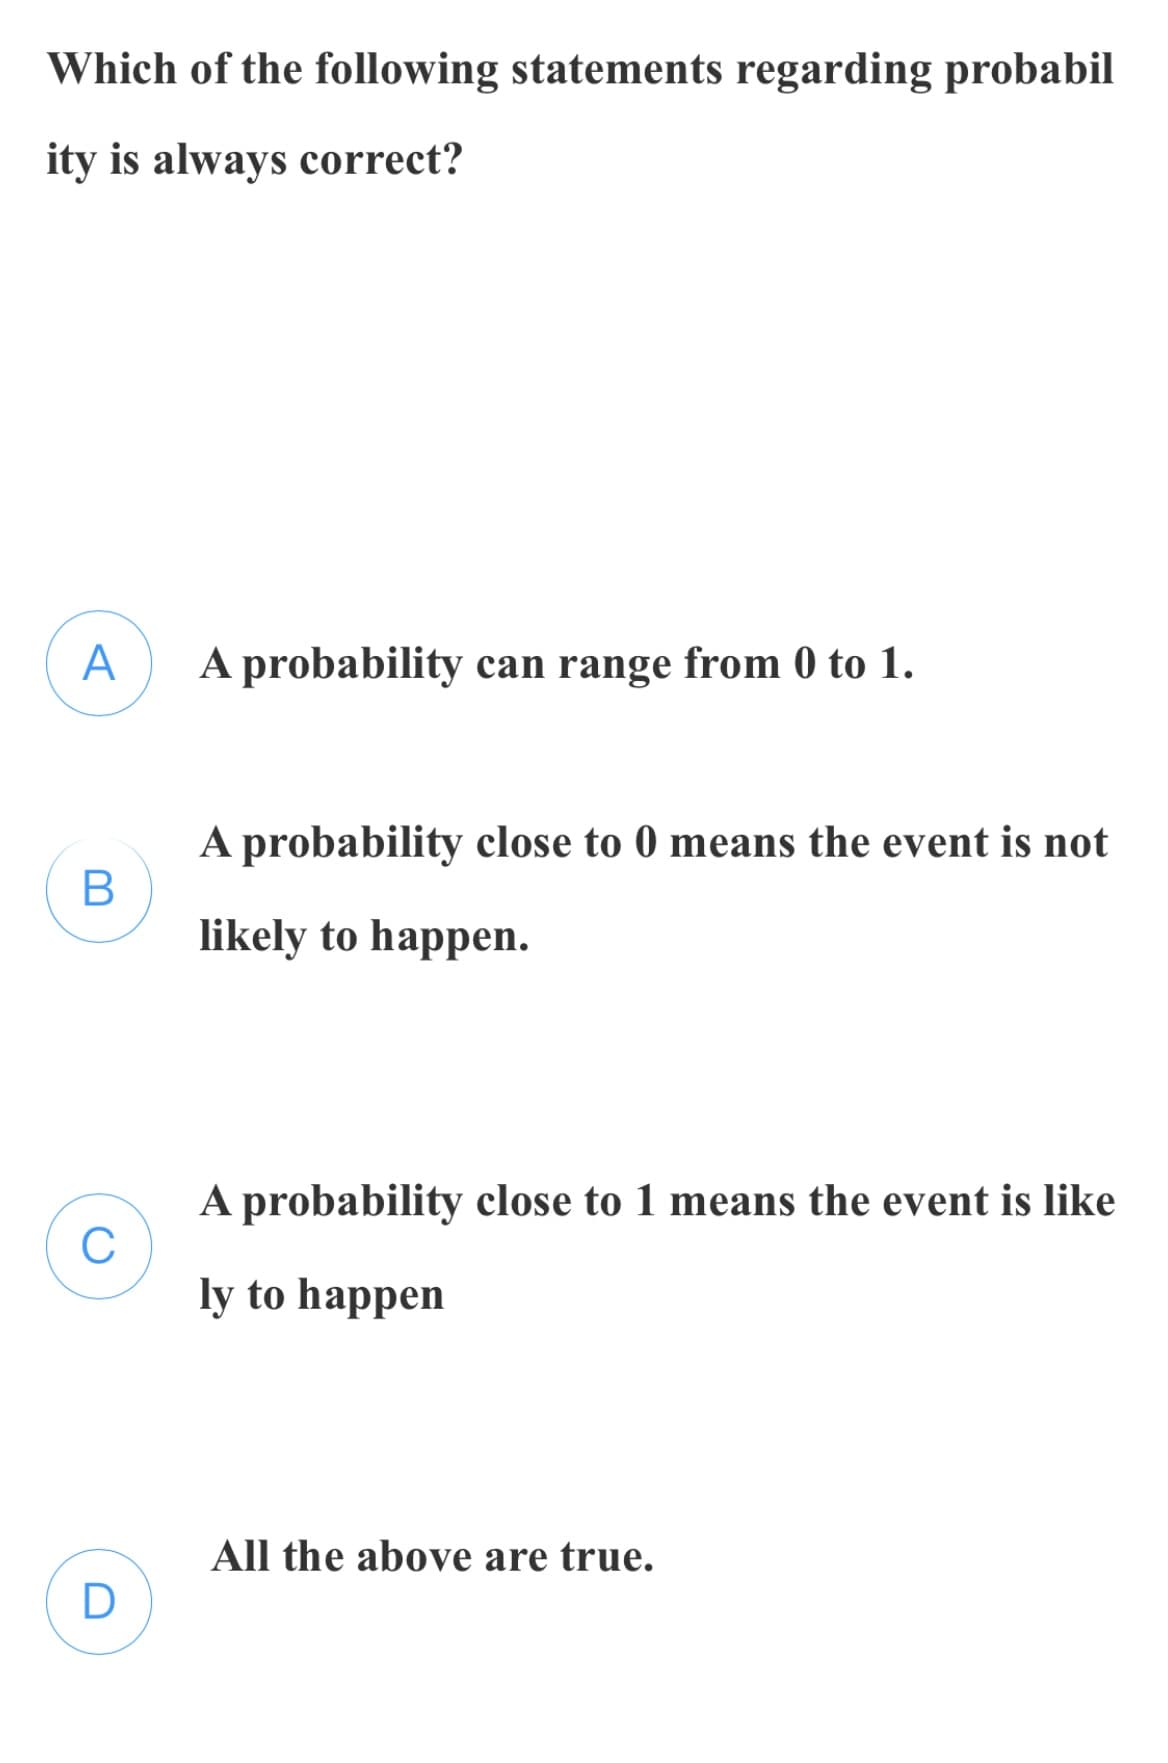 Which of the following statements regarding probabil
ity is always correct?
A
A probability can range from 0 to 1.
A probability close to 0 means the event is not
likely to happen.
A probability close to 1 means the event is like
C
ly to happen
All the above are true.
D
